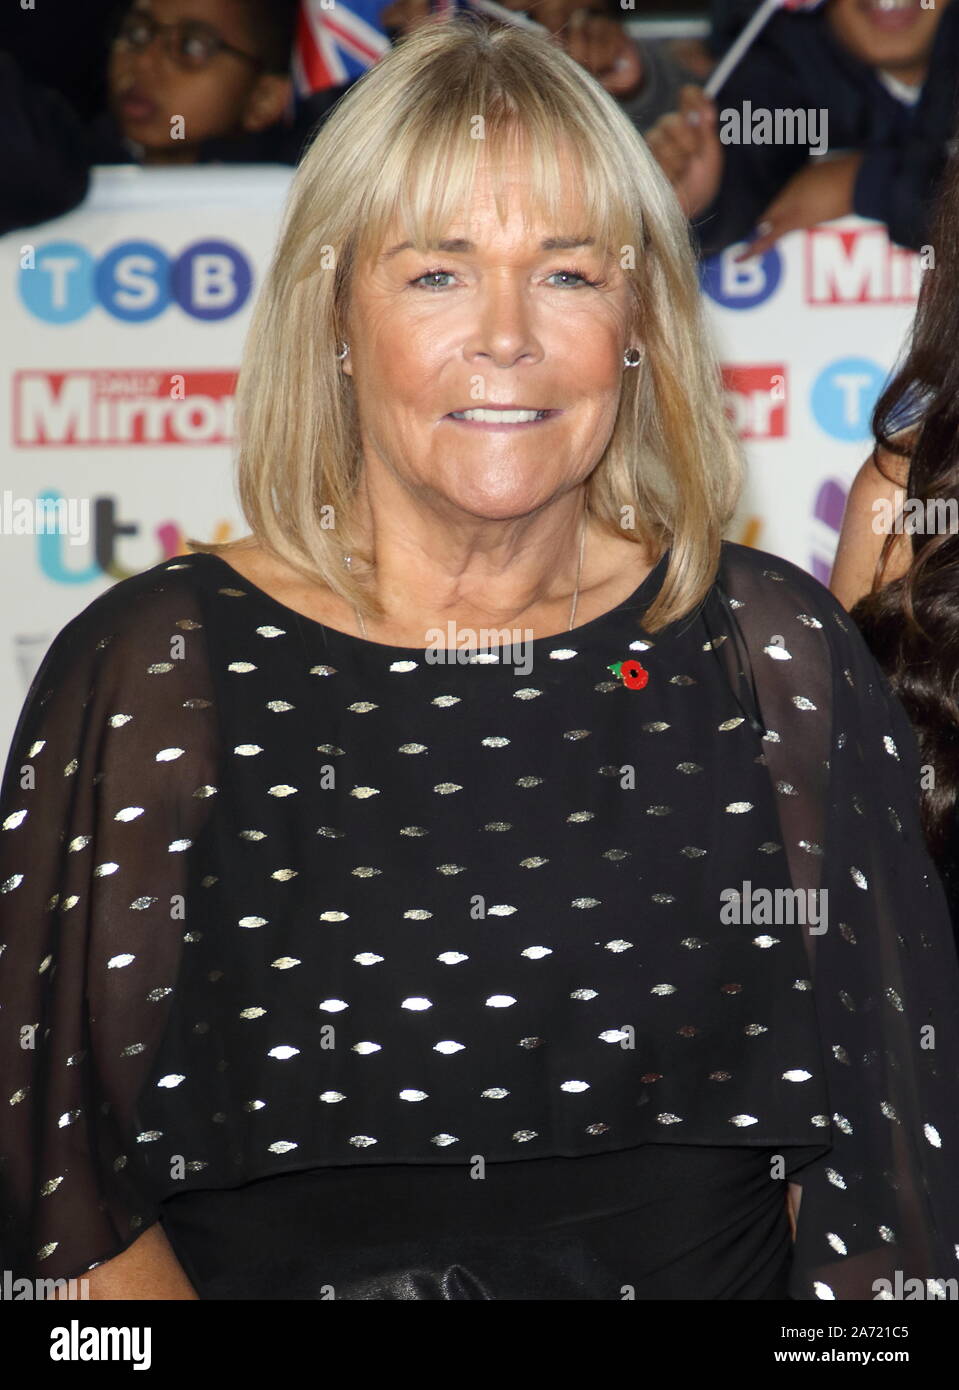 Linda Robson on the red carpet at The Daily Mirror Pride of Britain Awards, in partnership with TSB, at the Grosvenor House Hotel, Park Lane. Stock Photo